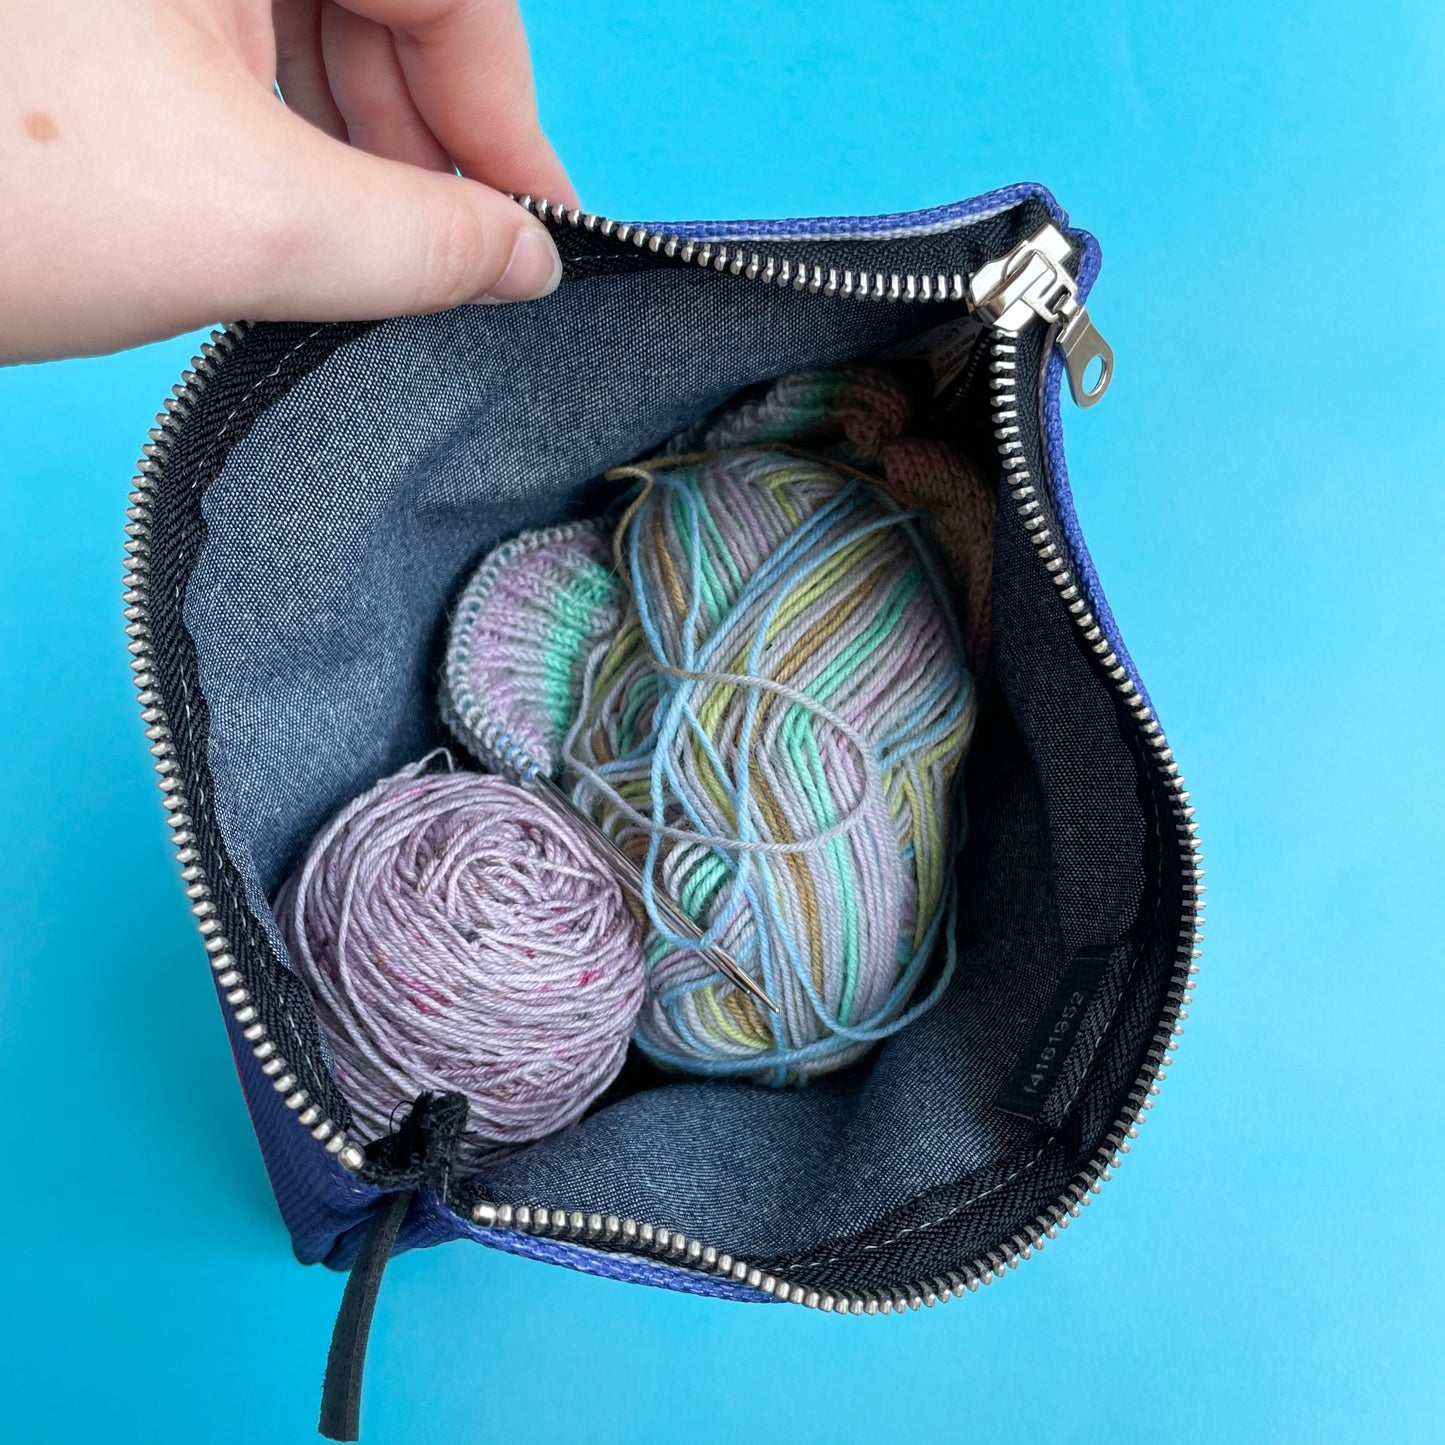 The inside of a denim zipper bag with balls of yarn and a sock cuff on knitting needles.